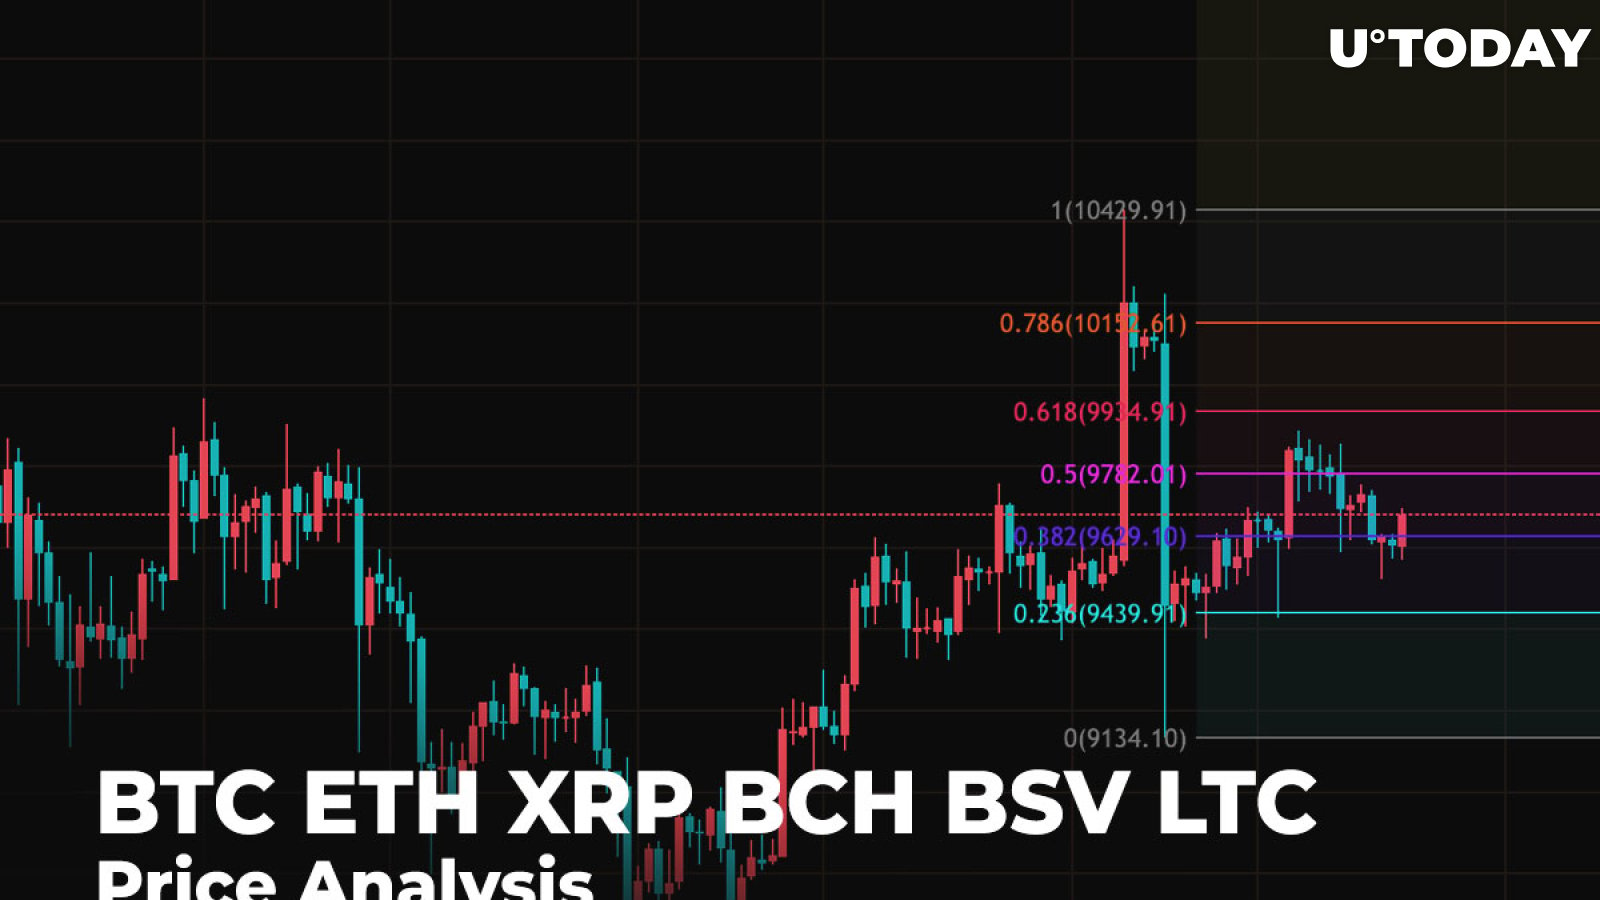 BTC, ETH, XRP, BCH, BSV, LTC Price Analysis - Could a Possible Rise be Applied to All Altcoins?